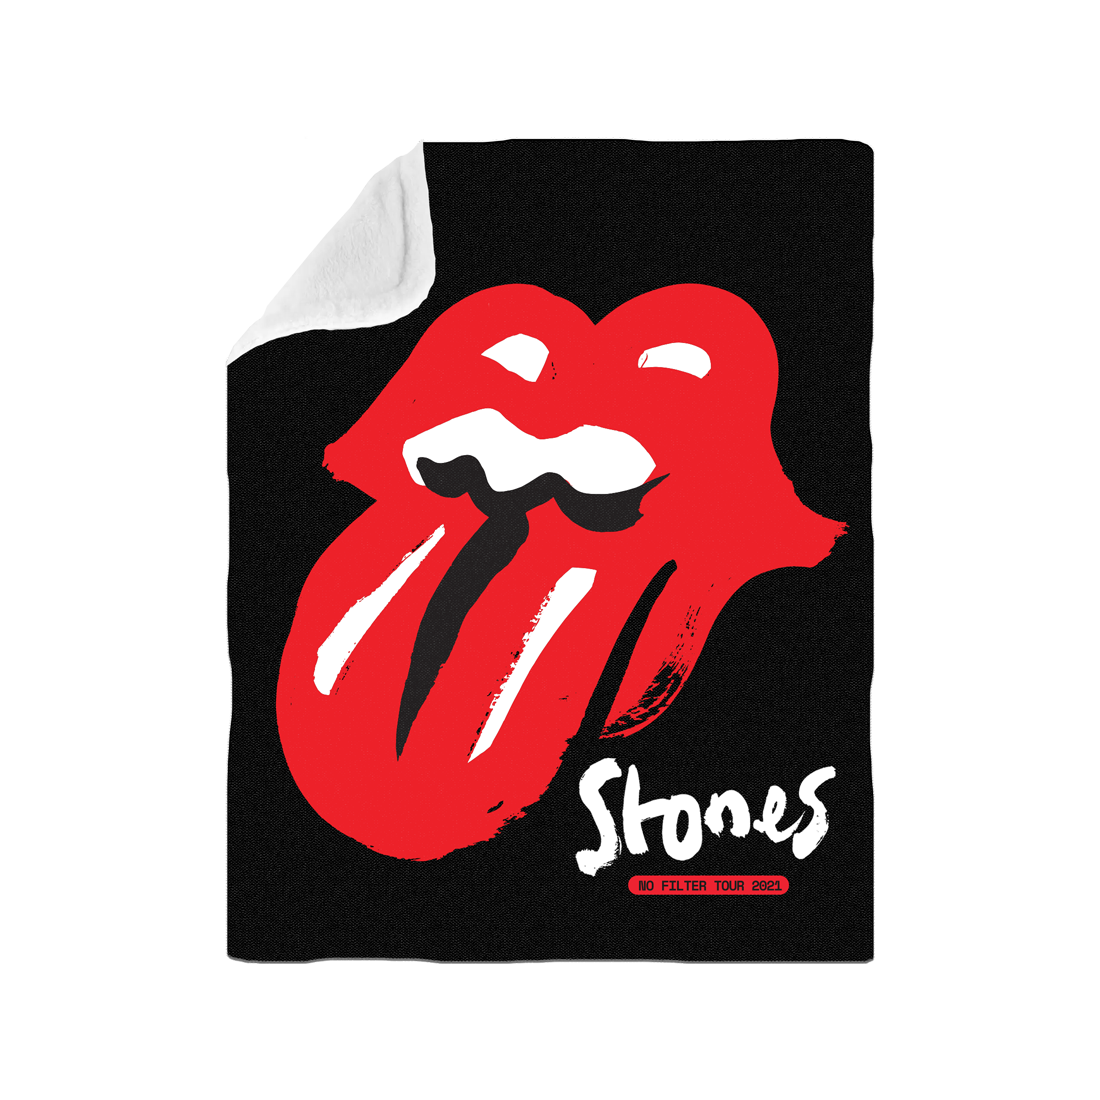 The Rolling Stones - No Filter 2021 Classic Licks Blanket